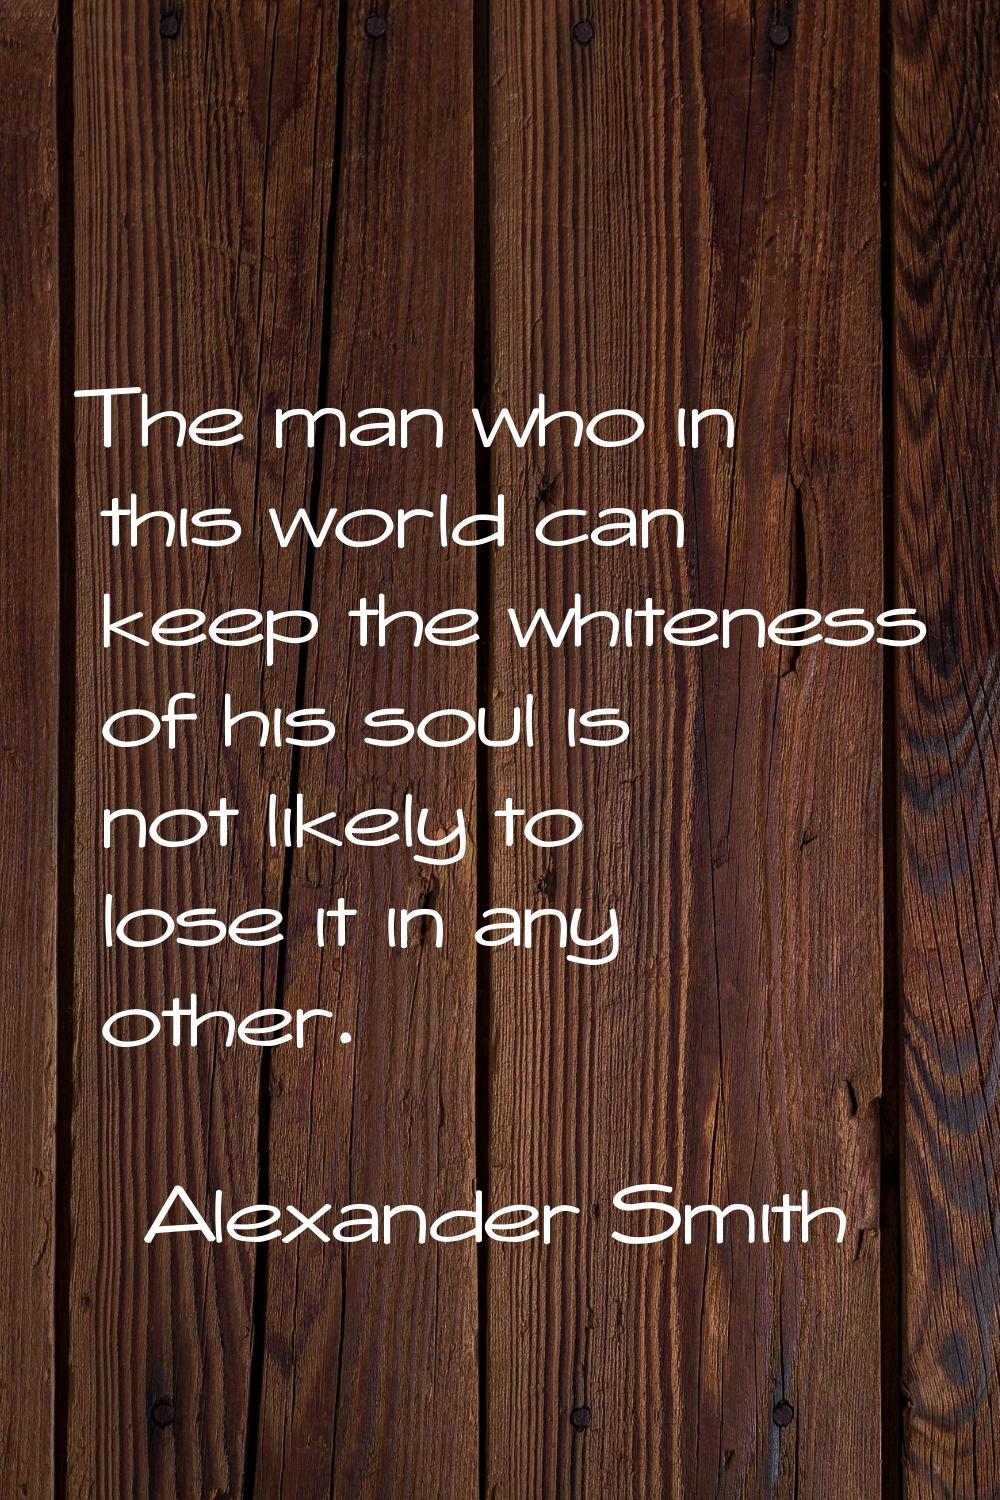 The man who in this world can keep the whiteness of his soul is not likely to lose it in any other.